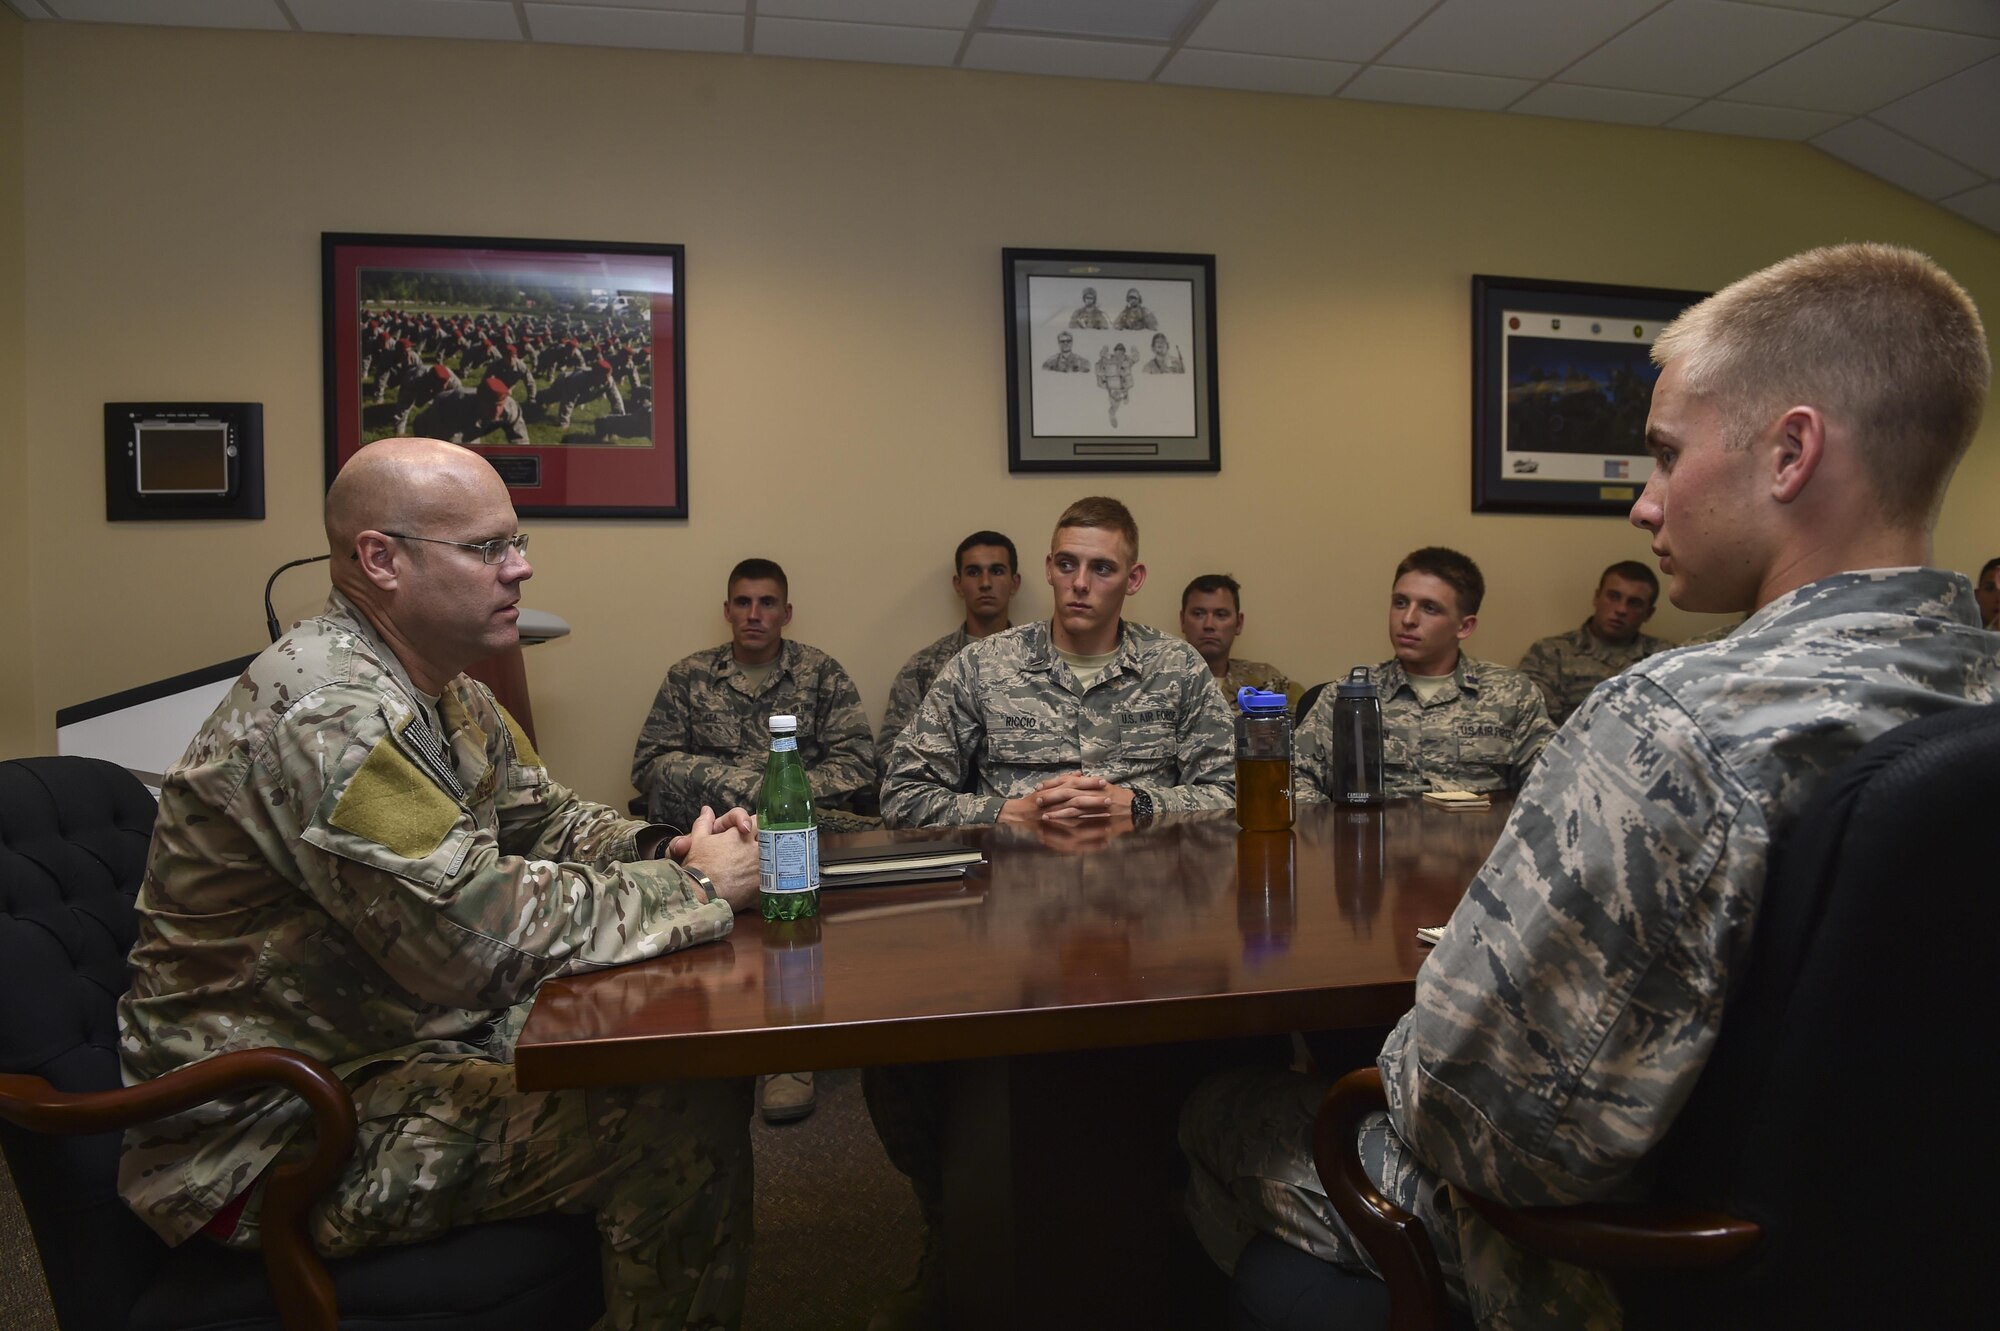 Col. Michael Martin, commander of the 24th Special Operations Wing, talks with ROTC cadets during a Special Tactics orientation course at Hurlburt Field, Fla., July 29, 2016. Run twice a summer by the 24th Special Operations Wing, 48 cadets spent a week learning what it takes to become a Special Tactics officer. (U.S. Air Force photo by Senior Airman Ryan Conroy)